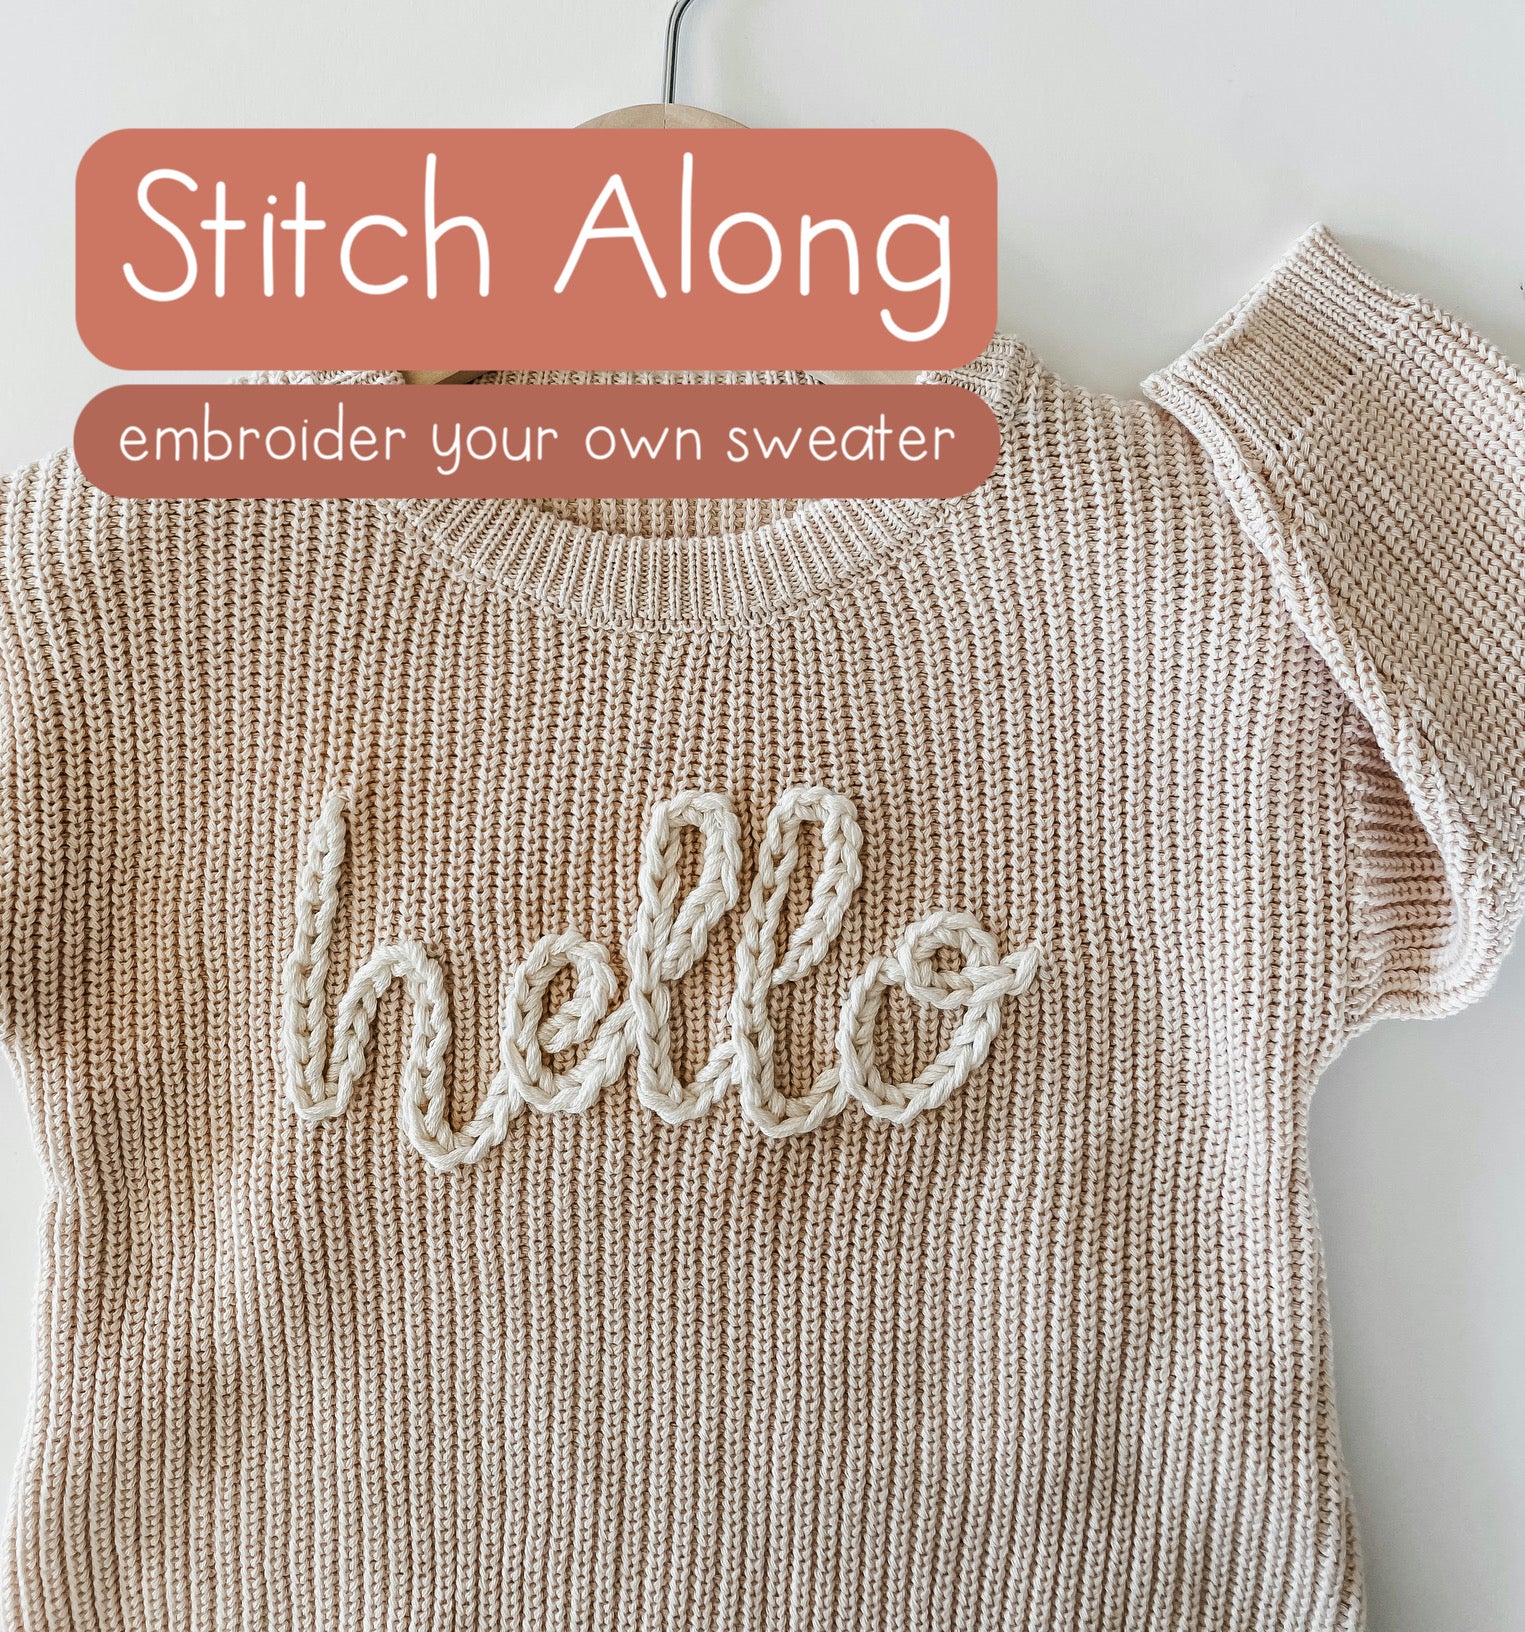 How to Use a Stick and Stitch Embroidery Design - Thread Unraveled